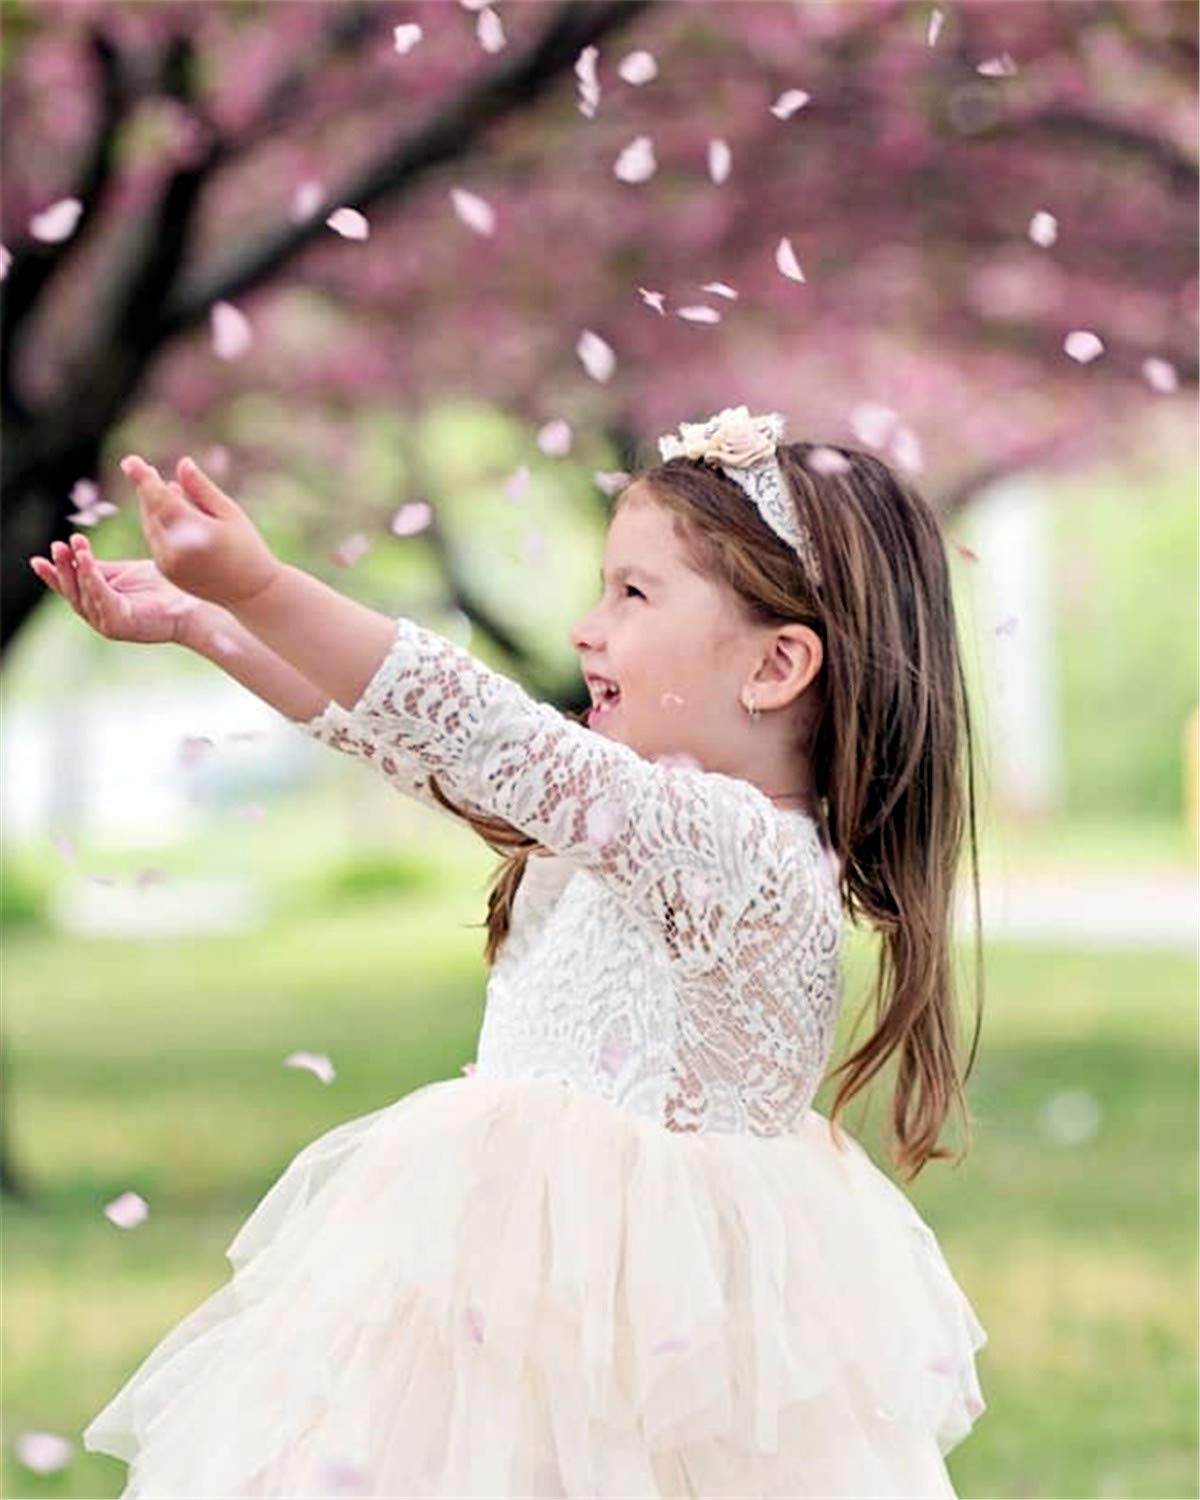 2Bunnies Flower Girl Dress Peony Lace Back A-Line Long Sleeve Tiered Tulle Short (Ivory) - 2BUNNIES